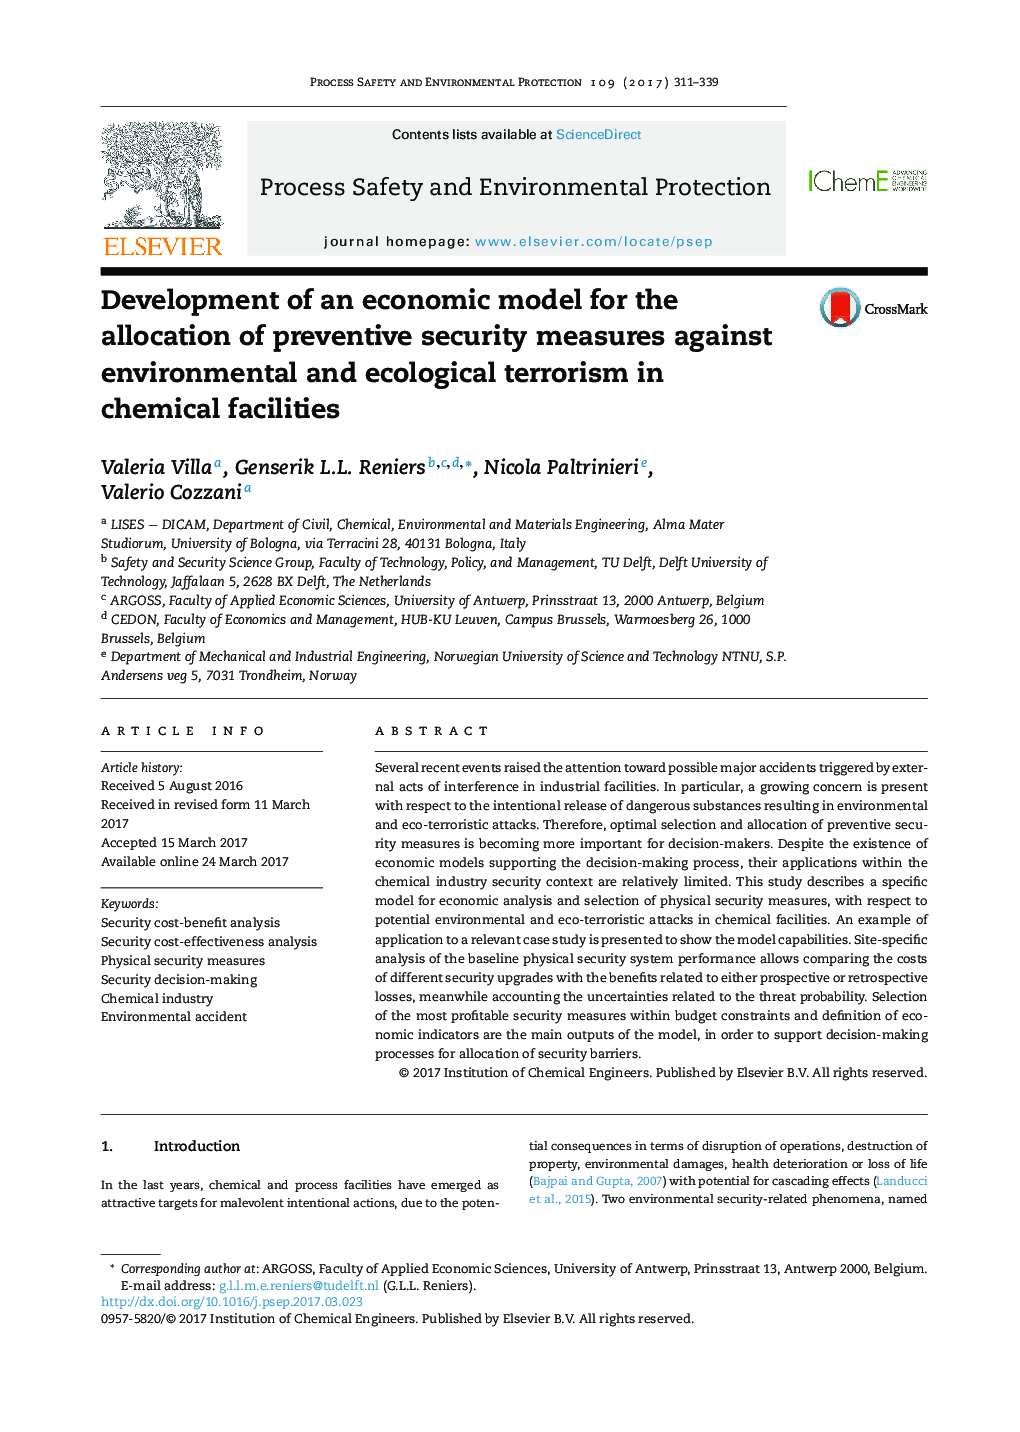 Development of an economic model for the allocation of preventive security measures against environmental and ecological terrorism in chemical facilities